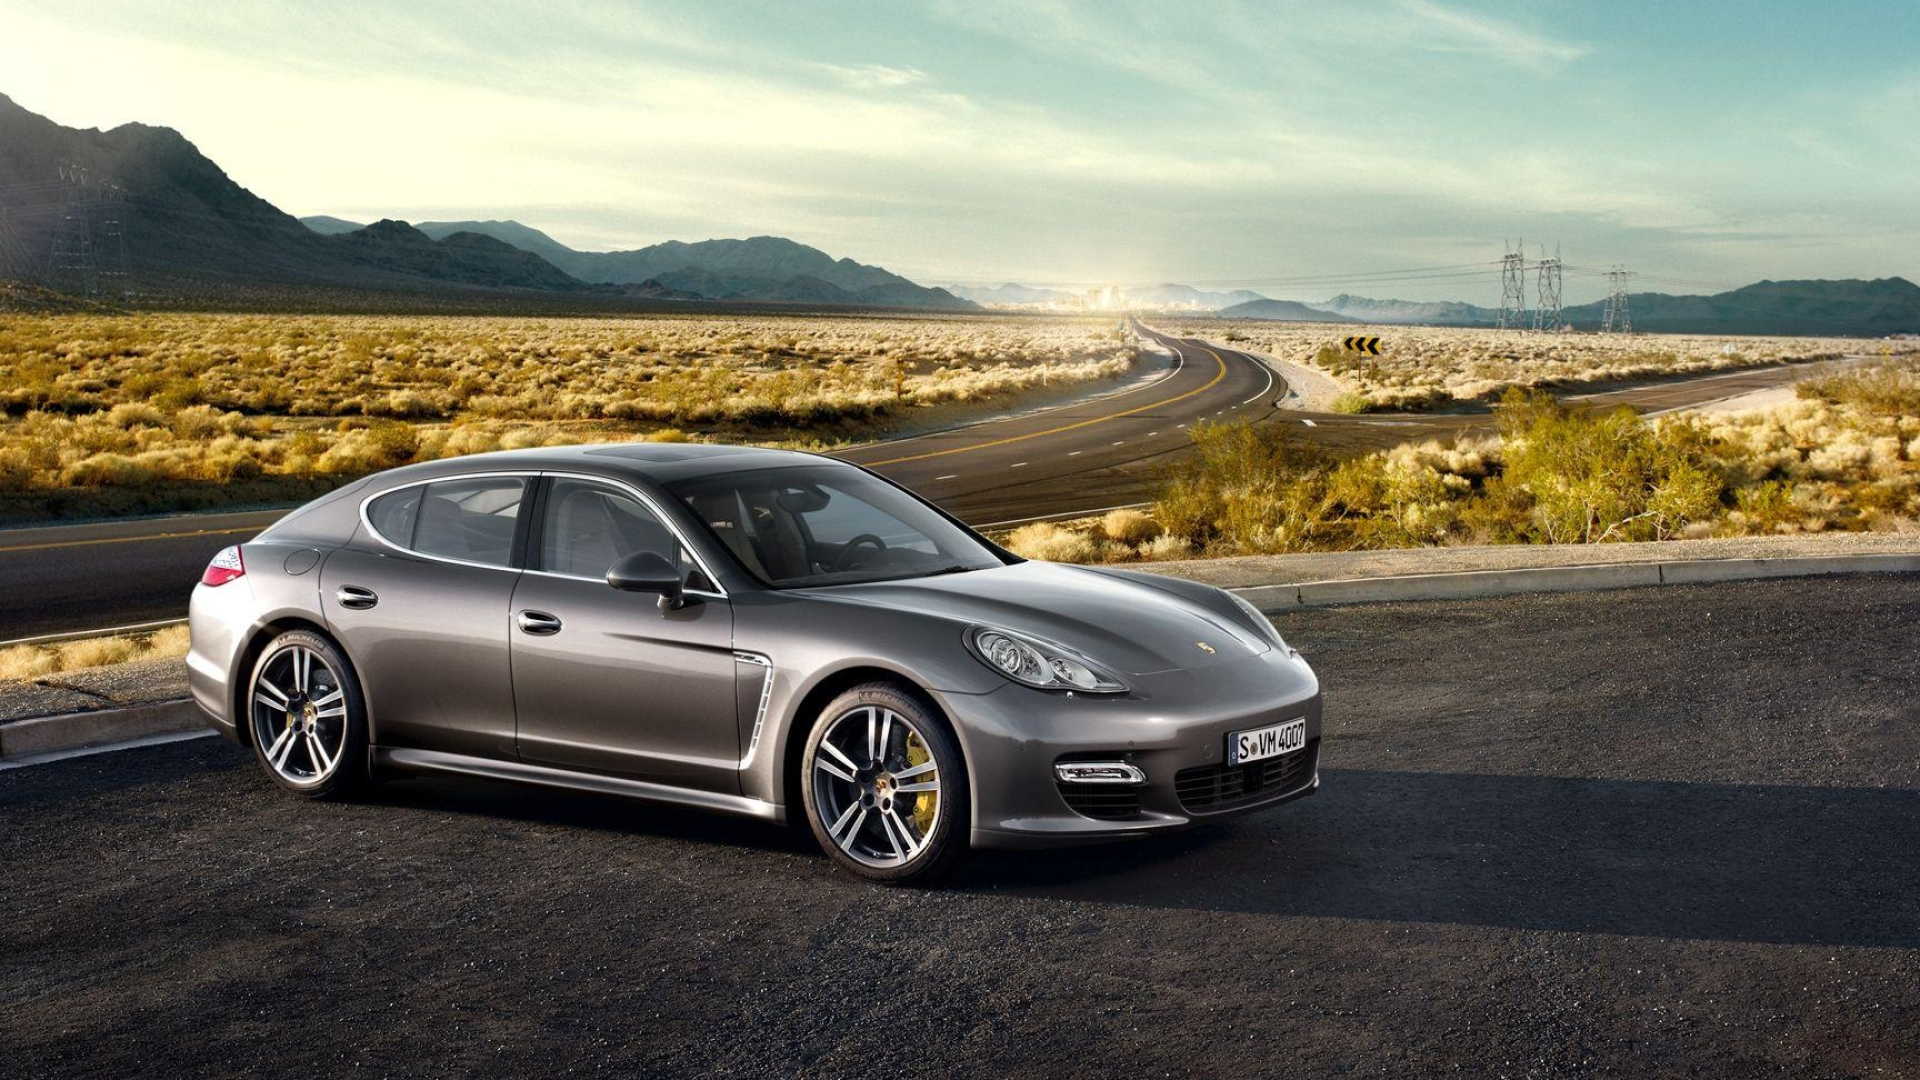 Porsche Panamera, Sporty and sophisticated, Unparalleled performance, Captivating design, 1920x1080 Full HD Desktop